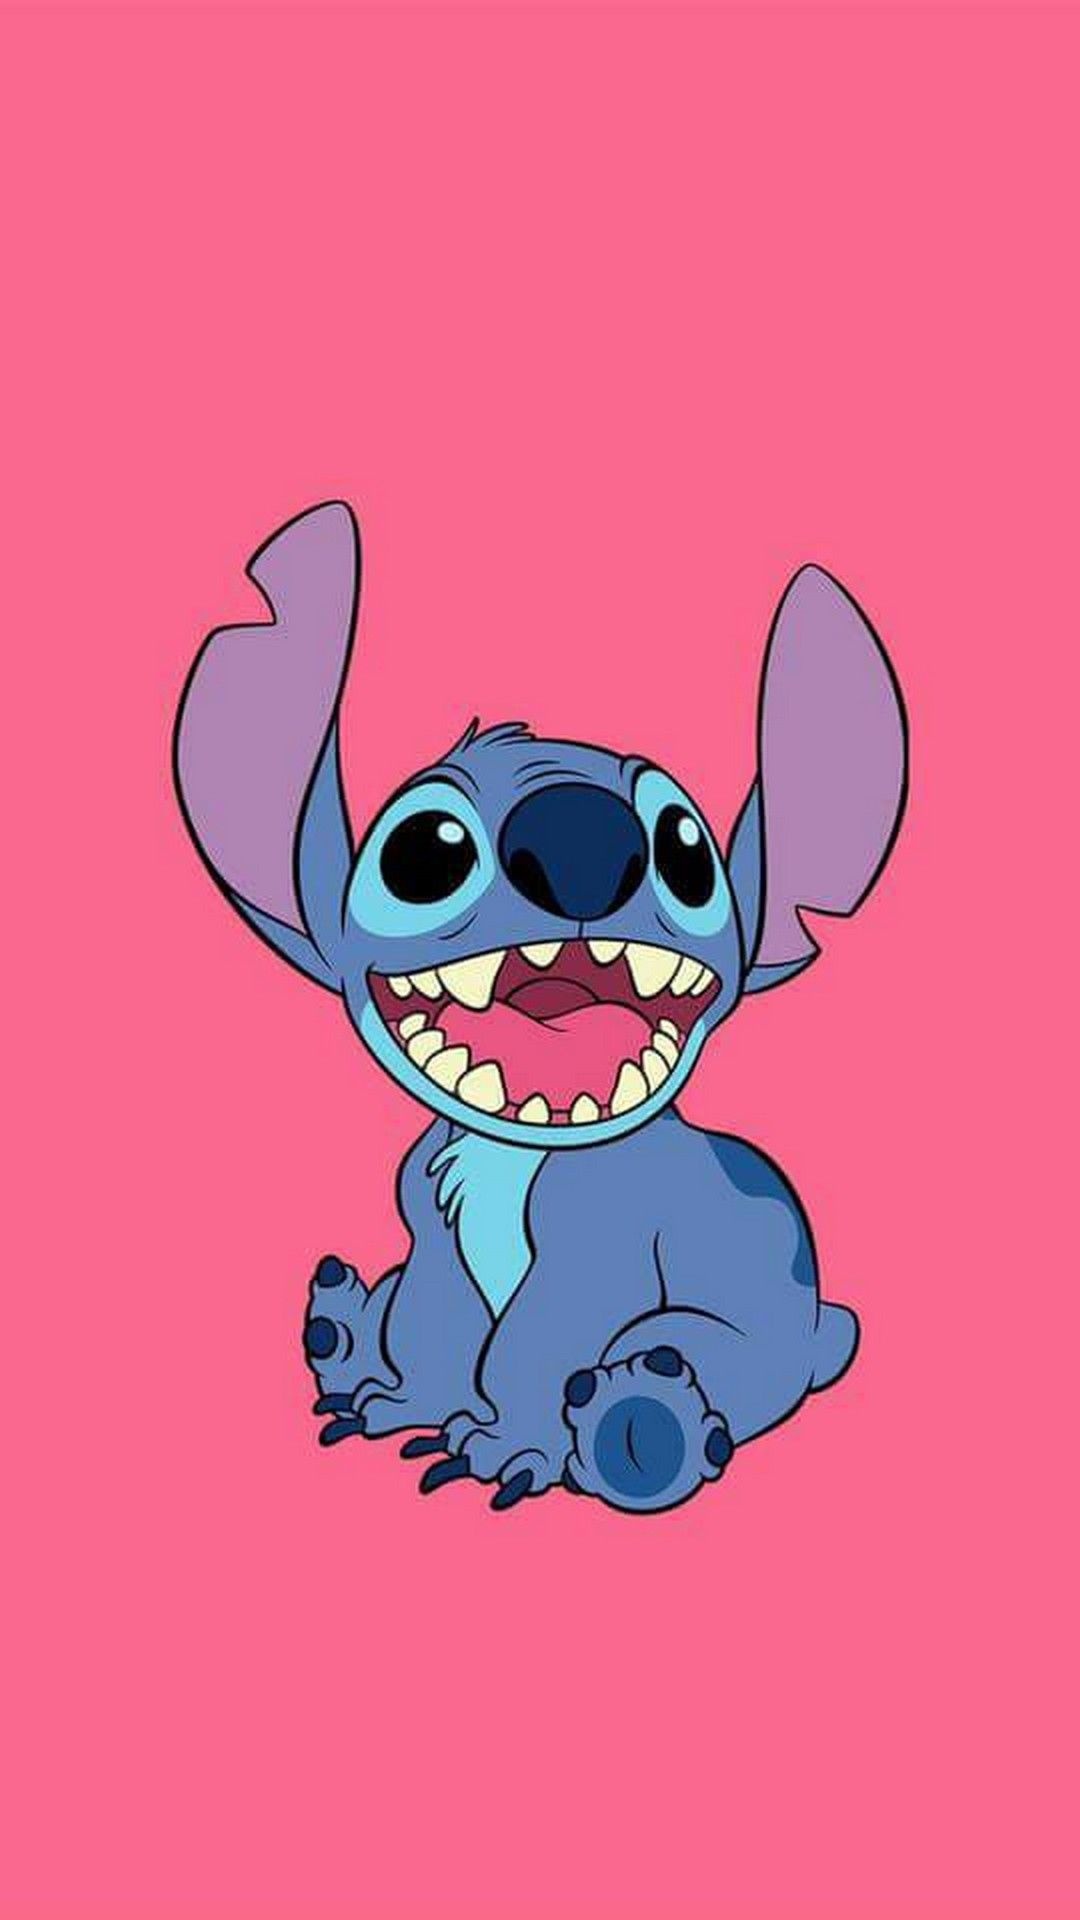 Stitch animation, Aesthetic cartoon wallpapers, Cute alien companion, Popular backgrounds, 1080x1920 Full HD Handy